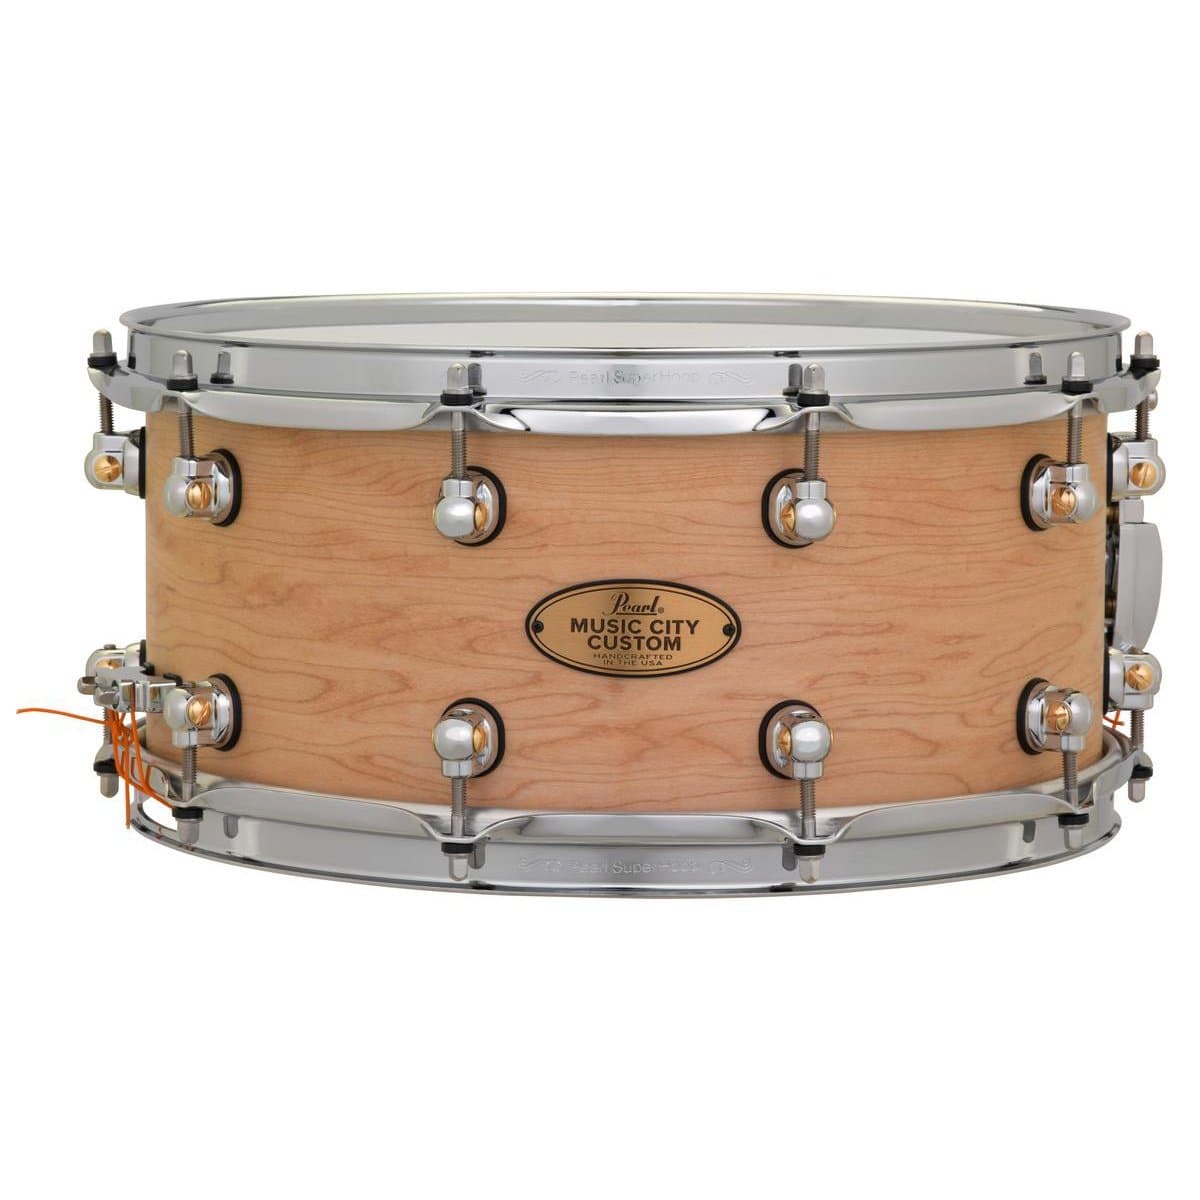 Pearl Music City Custom Solid Maple 14x6.5 Snare Drum - Hand-Rubbed Natural